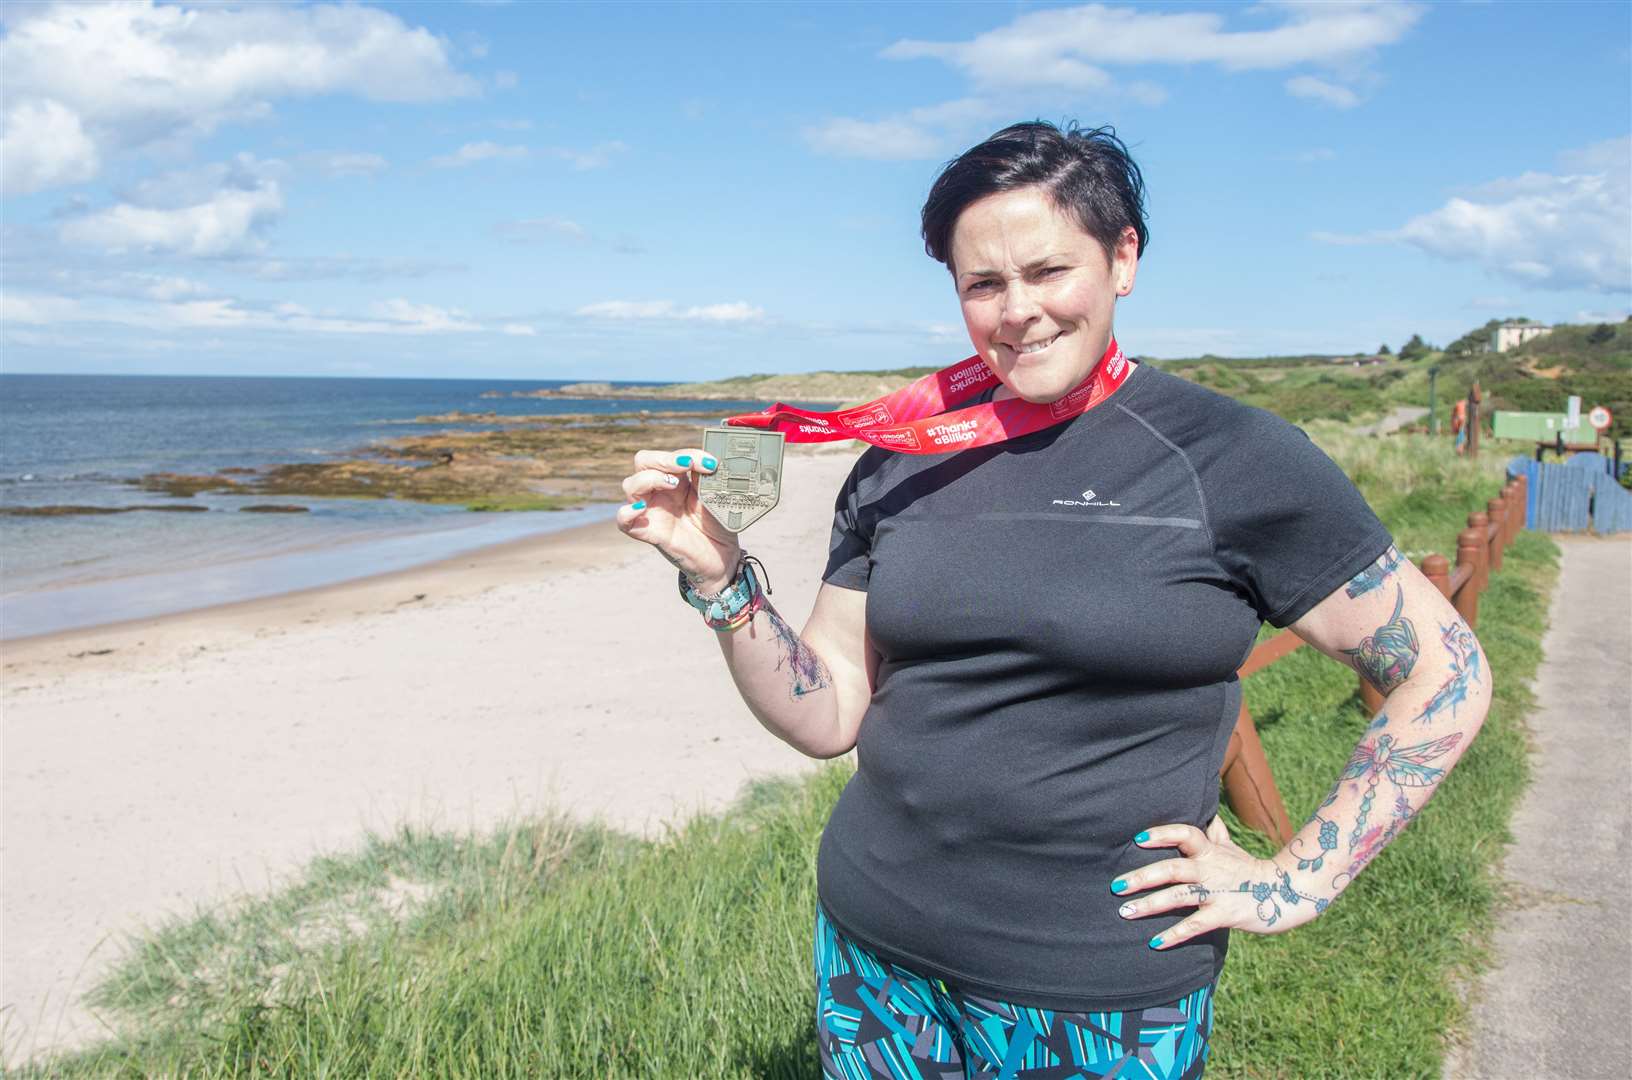 Jeni Johnston, a coach for Weight Watchers, has lost five stone. She's pictured with the medal she won for running the London Marathon in April. Picture: Becky Saunderson. Image No.044247.